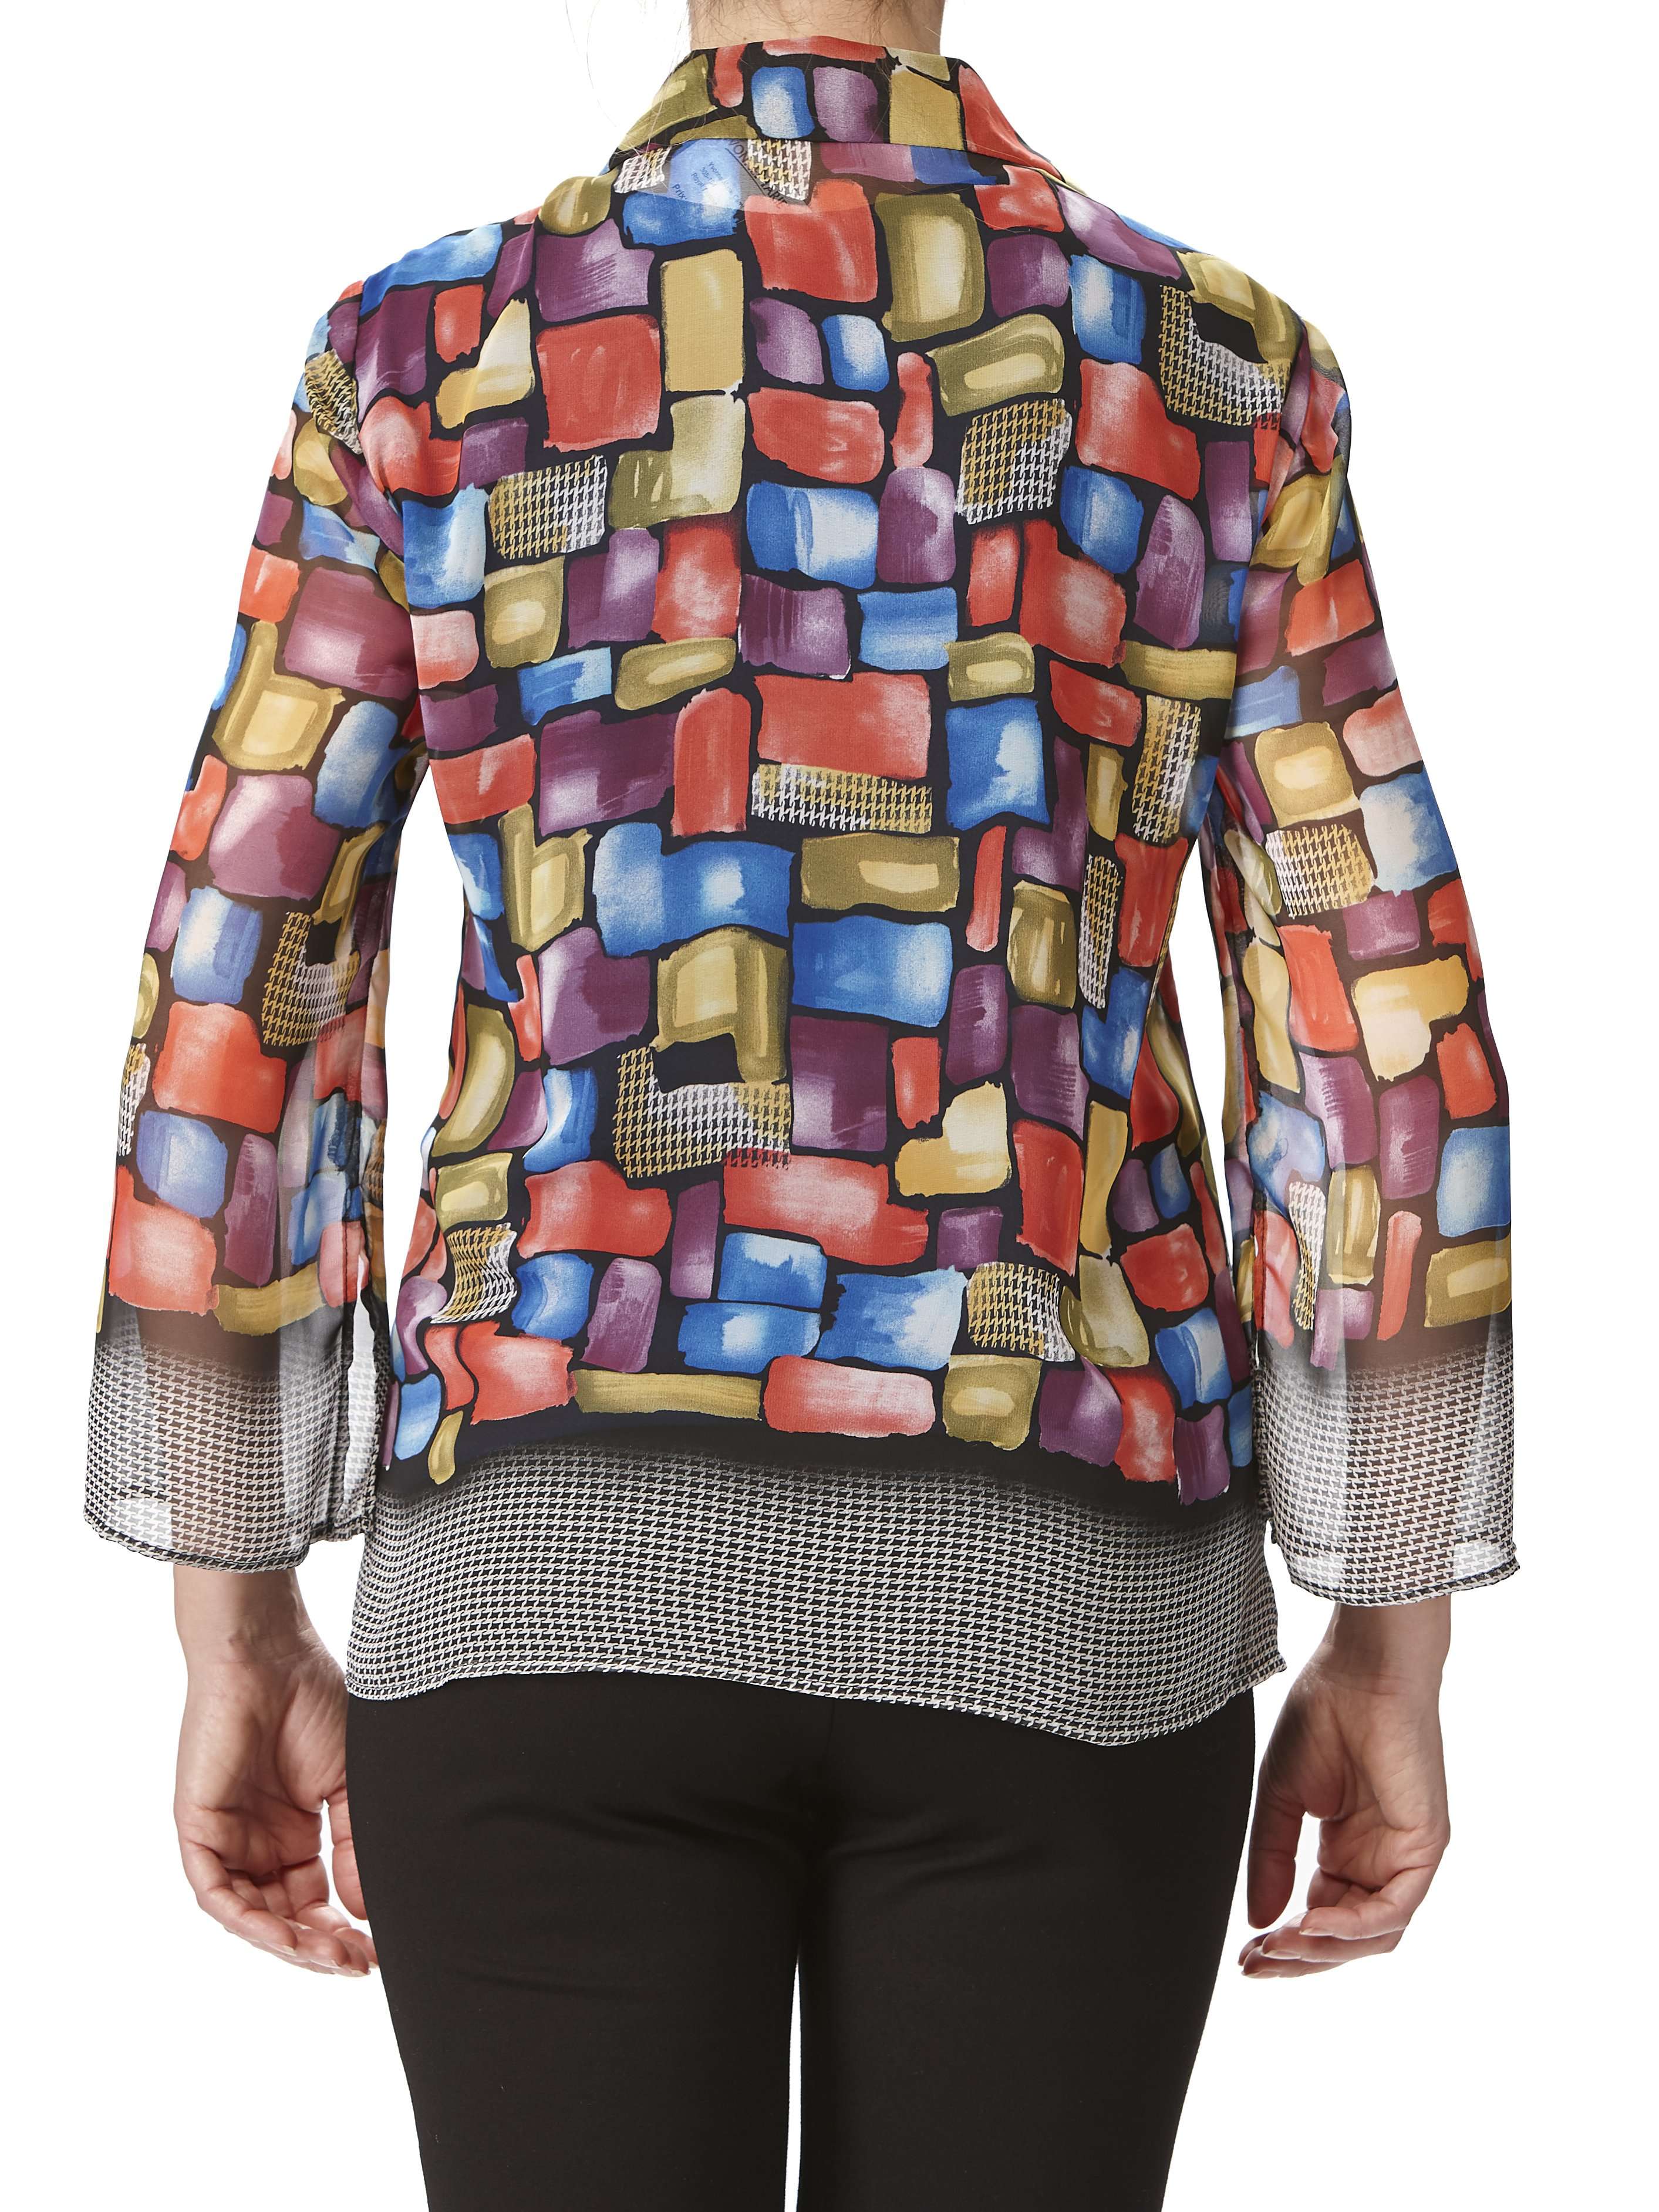 Women's Blouses Made In Canada Colorful Designer Blouse Made in Canada Yvonne Marie Original Exclusive Print Amazing Quality and Fit - Yvonne Marie - Yvonne Marie